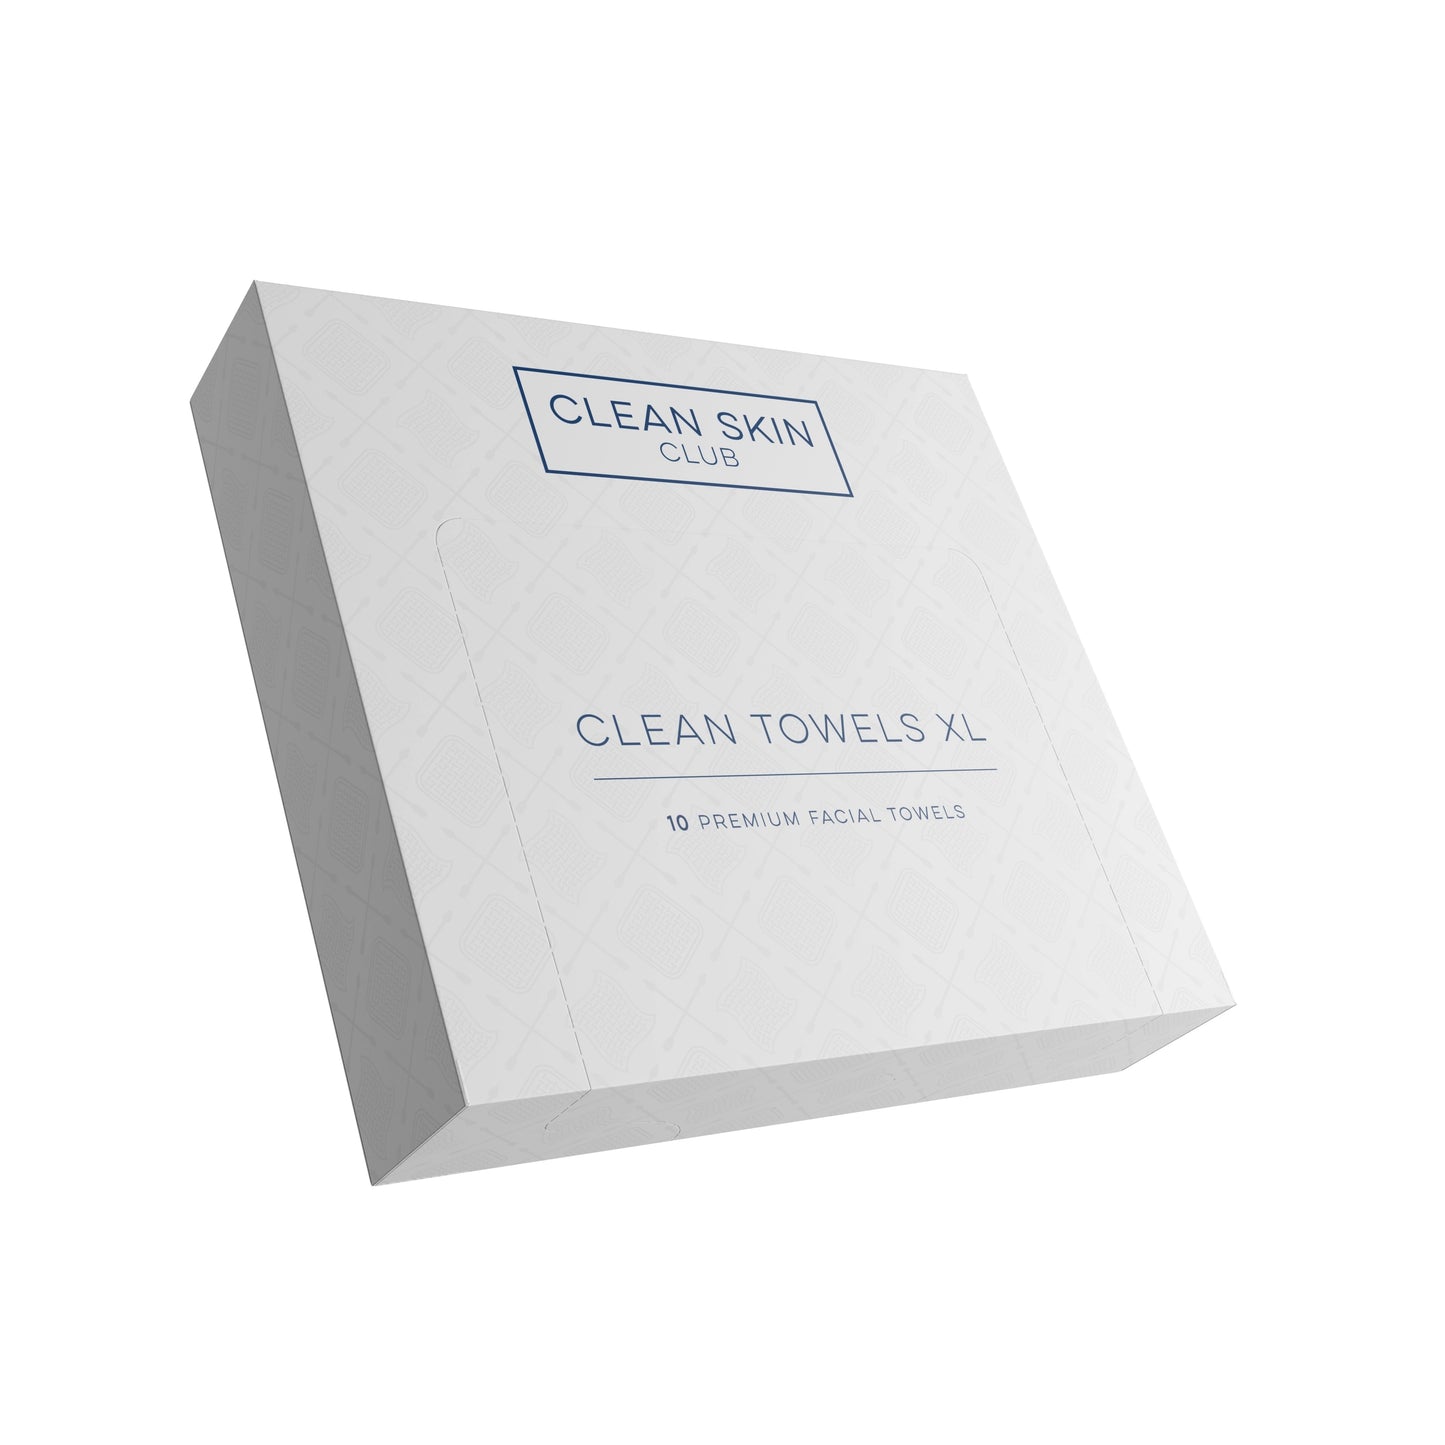 Clean Towels Xl Travel, Disposable Face Towels, 10 Count